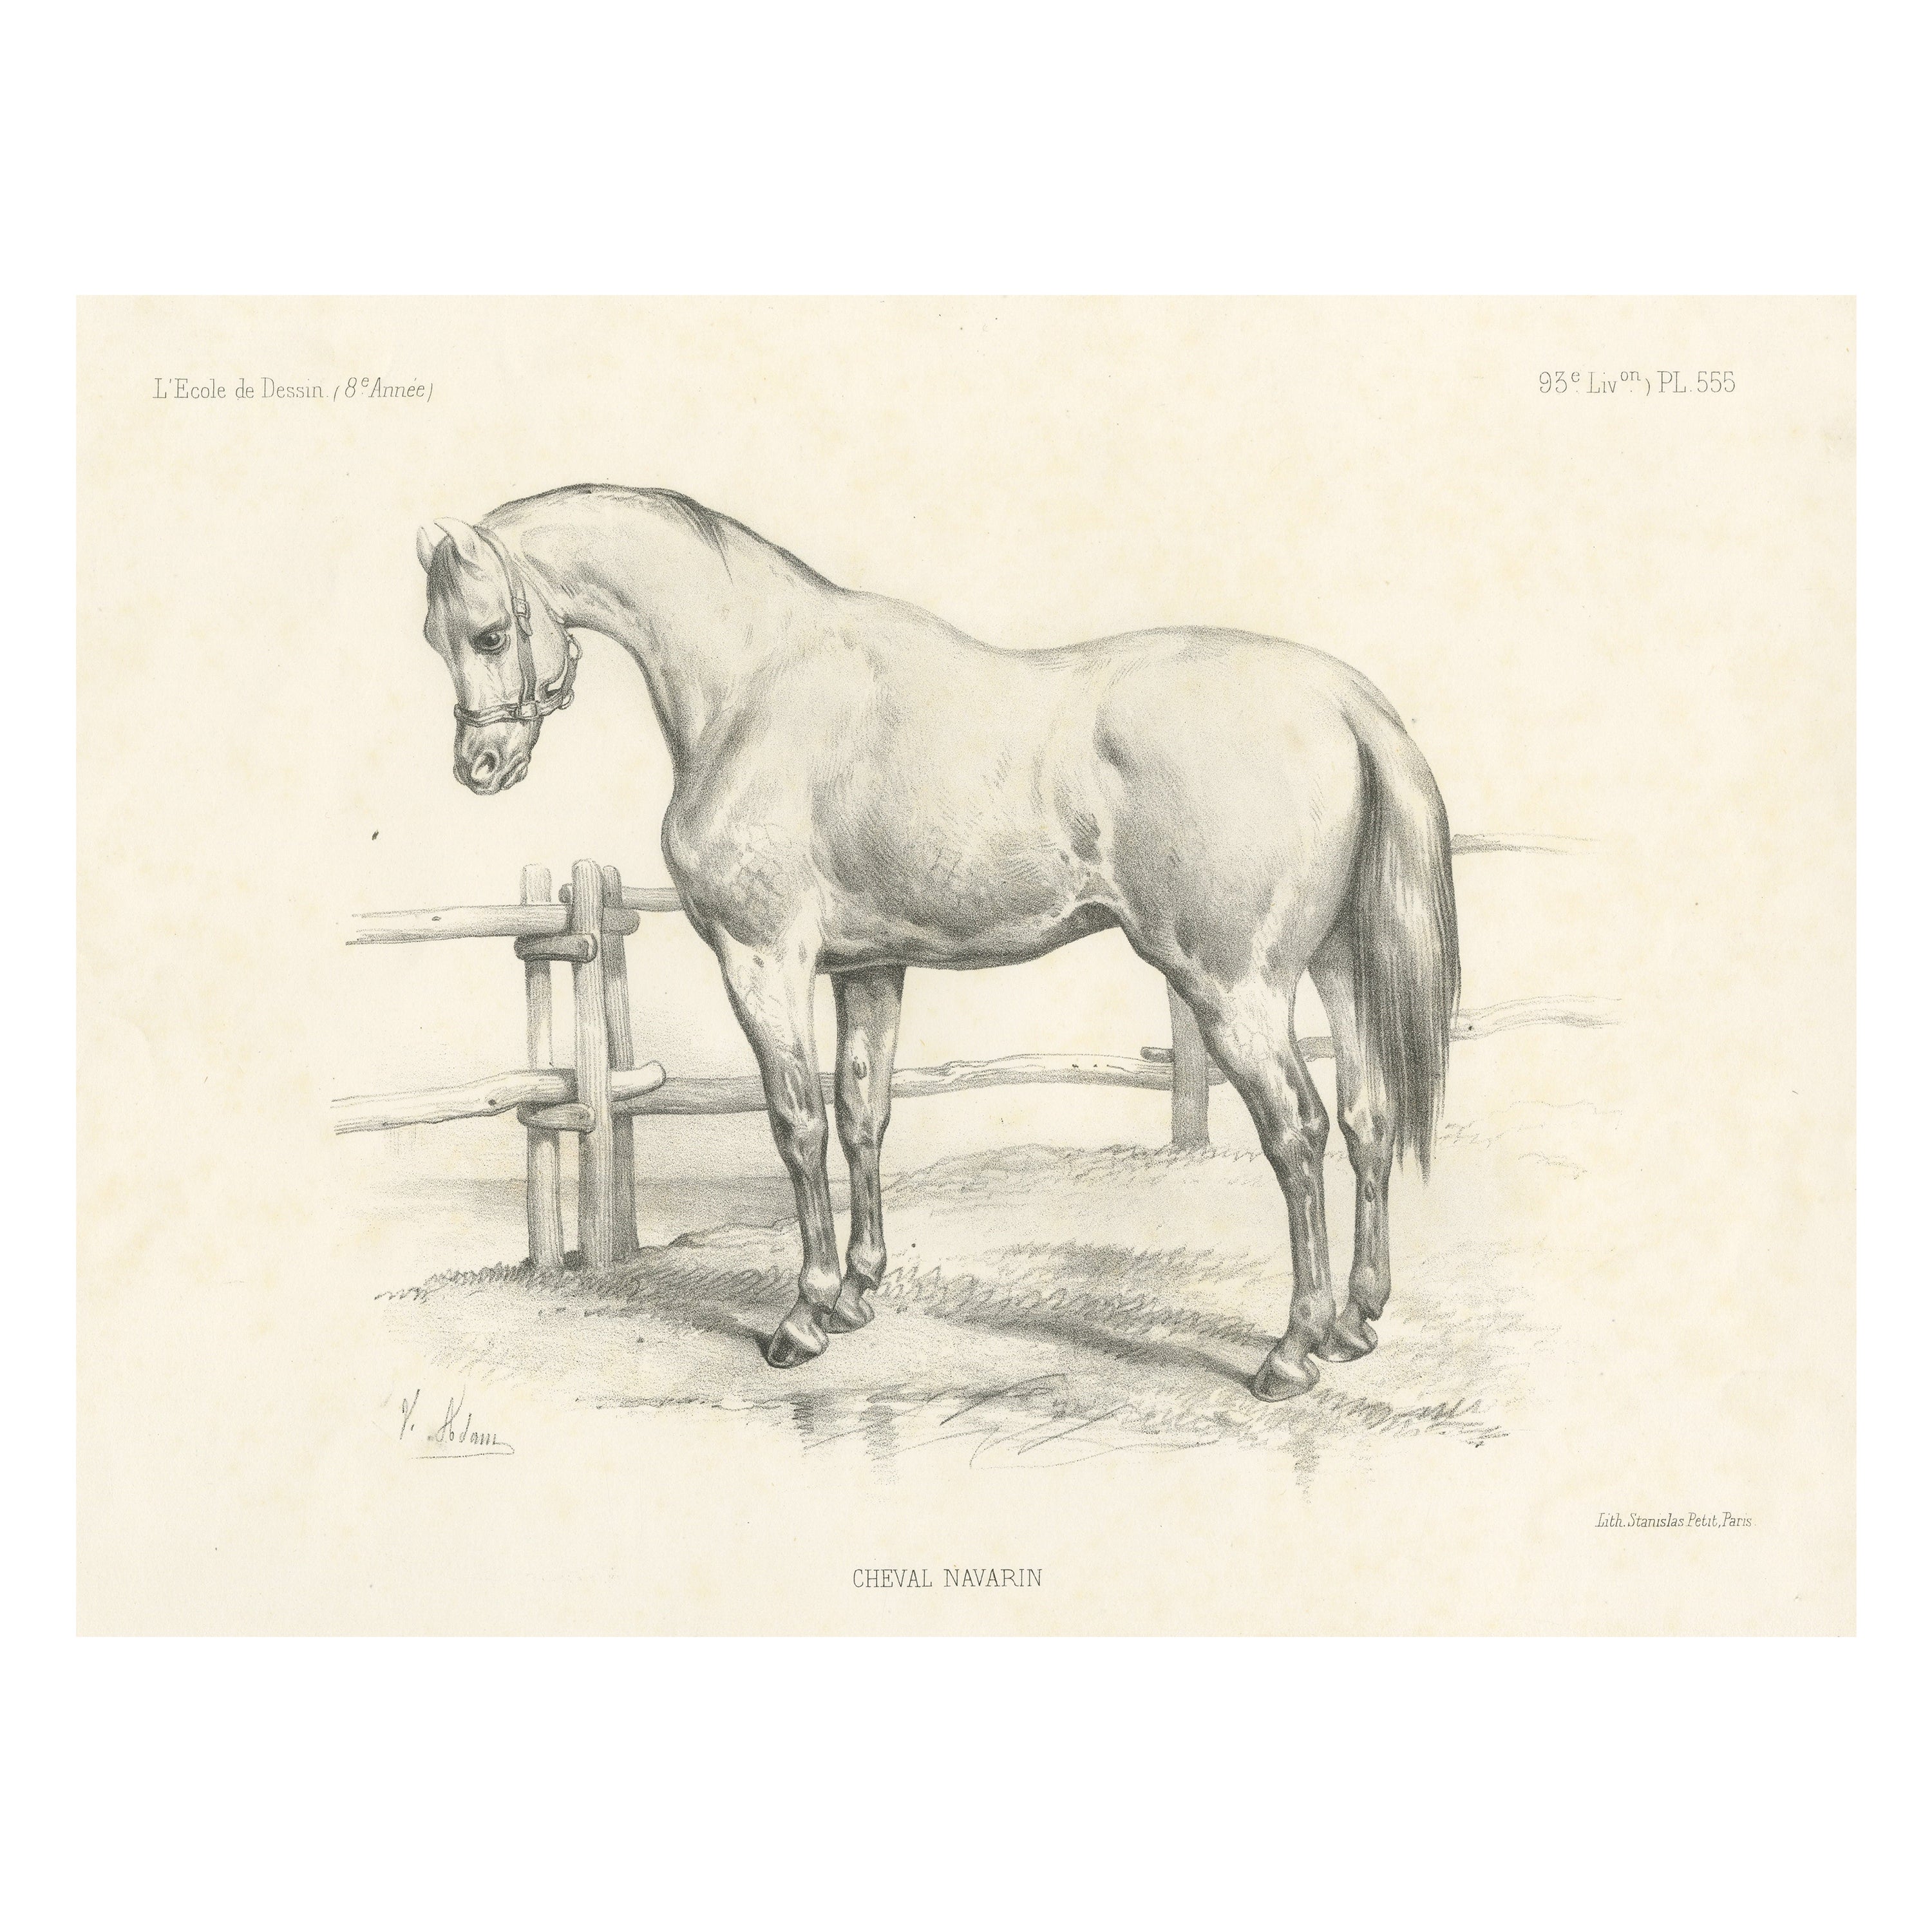 Original Antique Print of a Navarrin Horse, an Extinct Breed from France